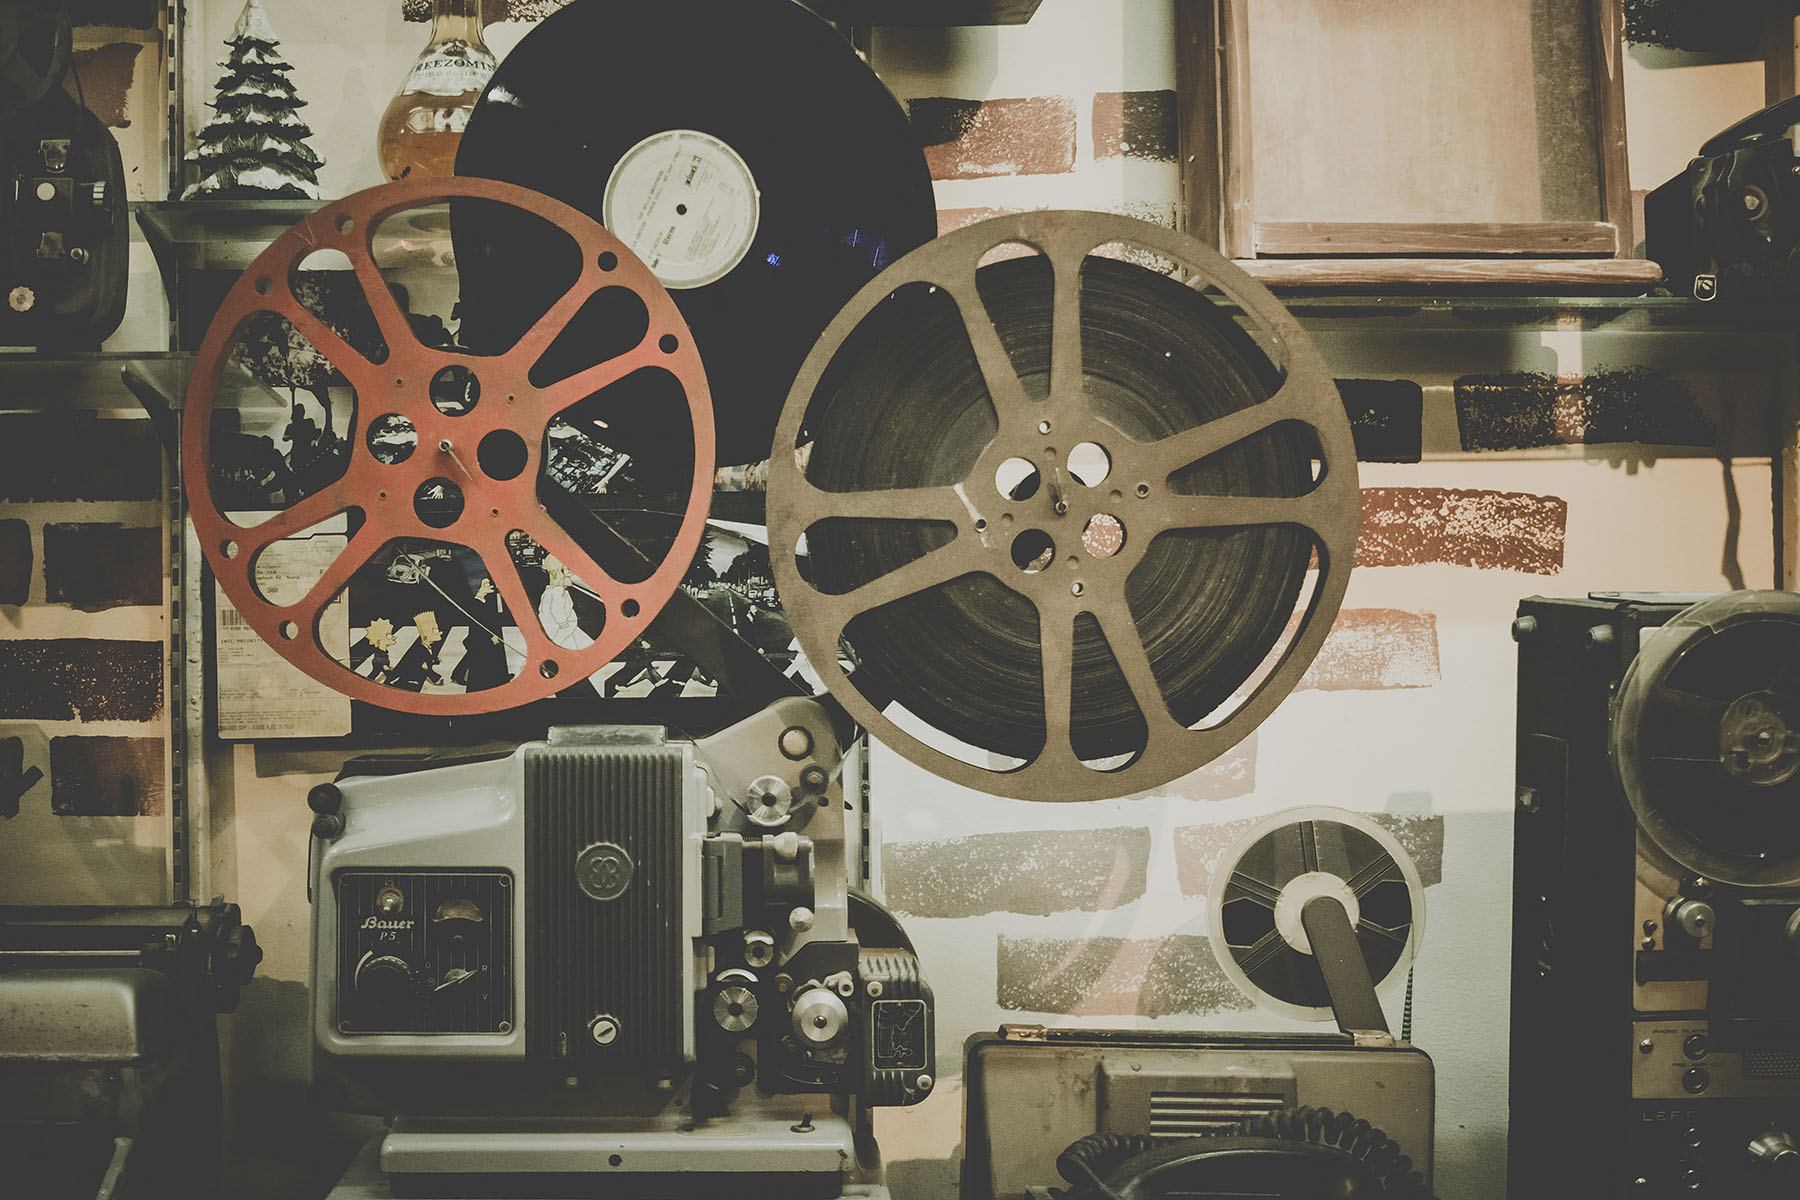 Stock photo of a film projector with multiple reels from RawPixel.com